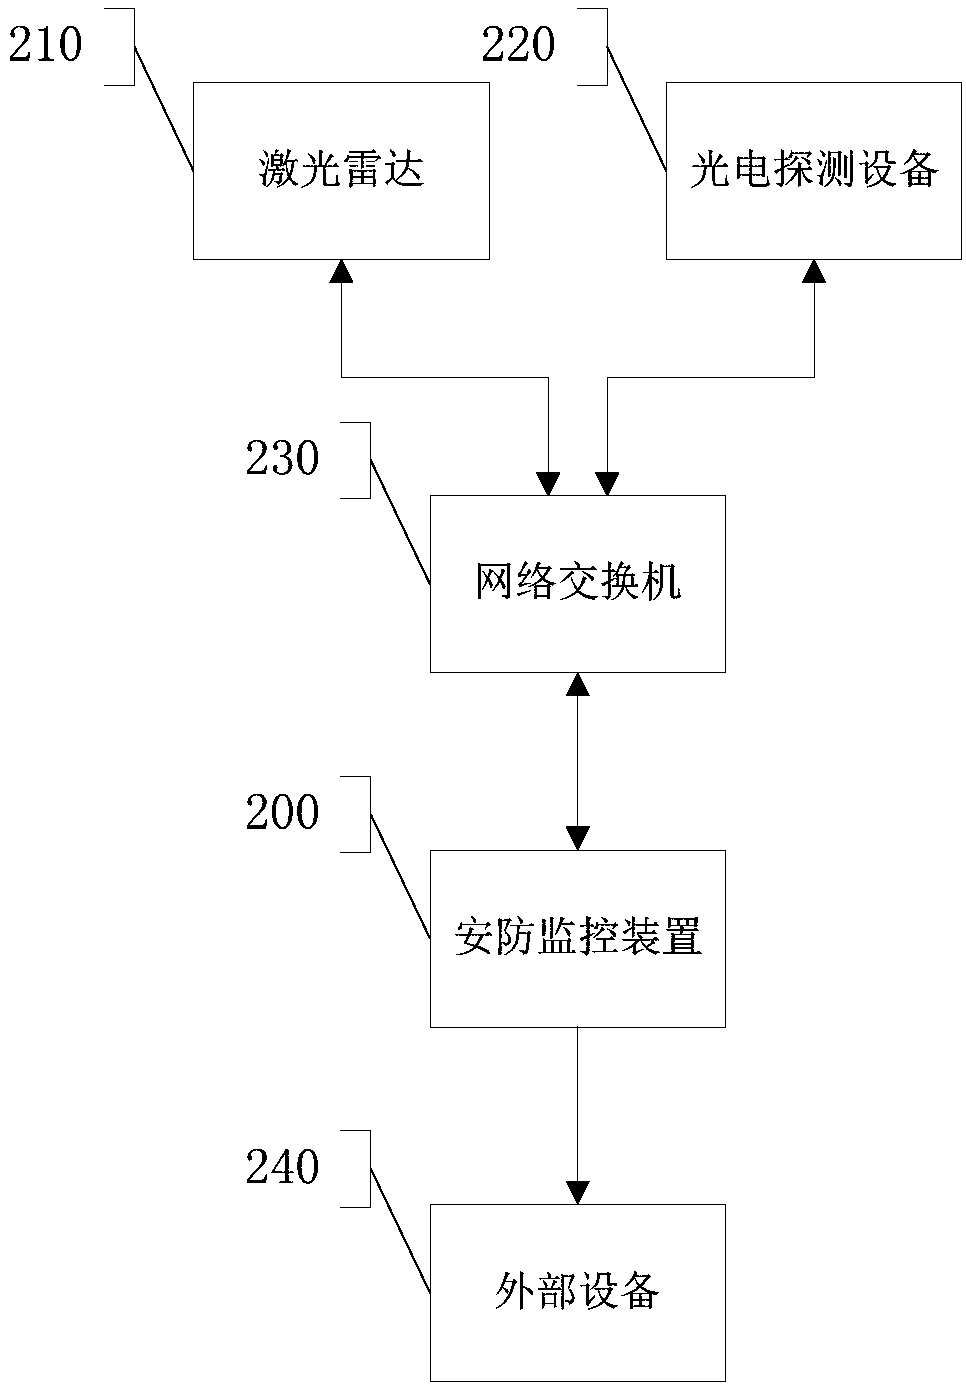 Laser-radar-based intelligent security and protection monitoring device, method and system